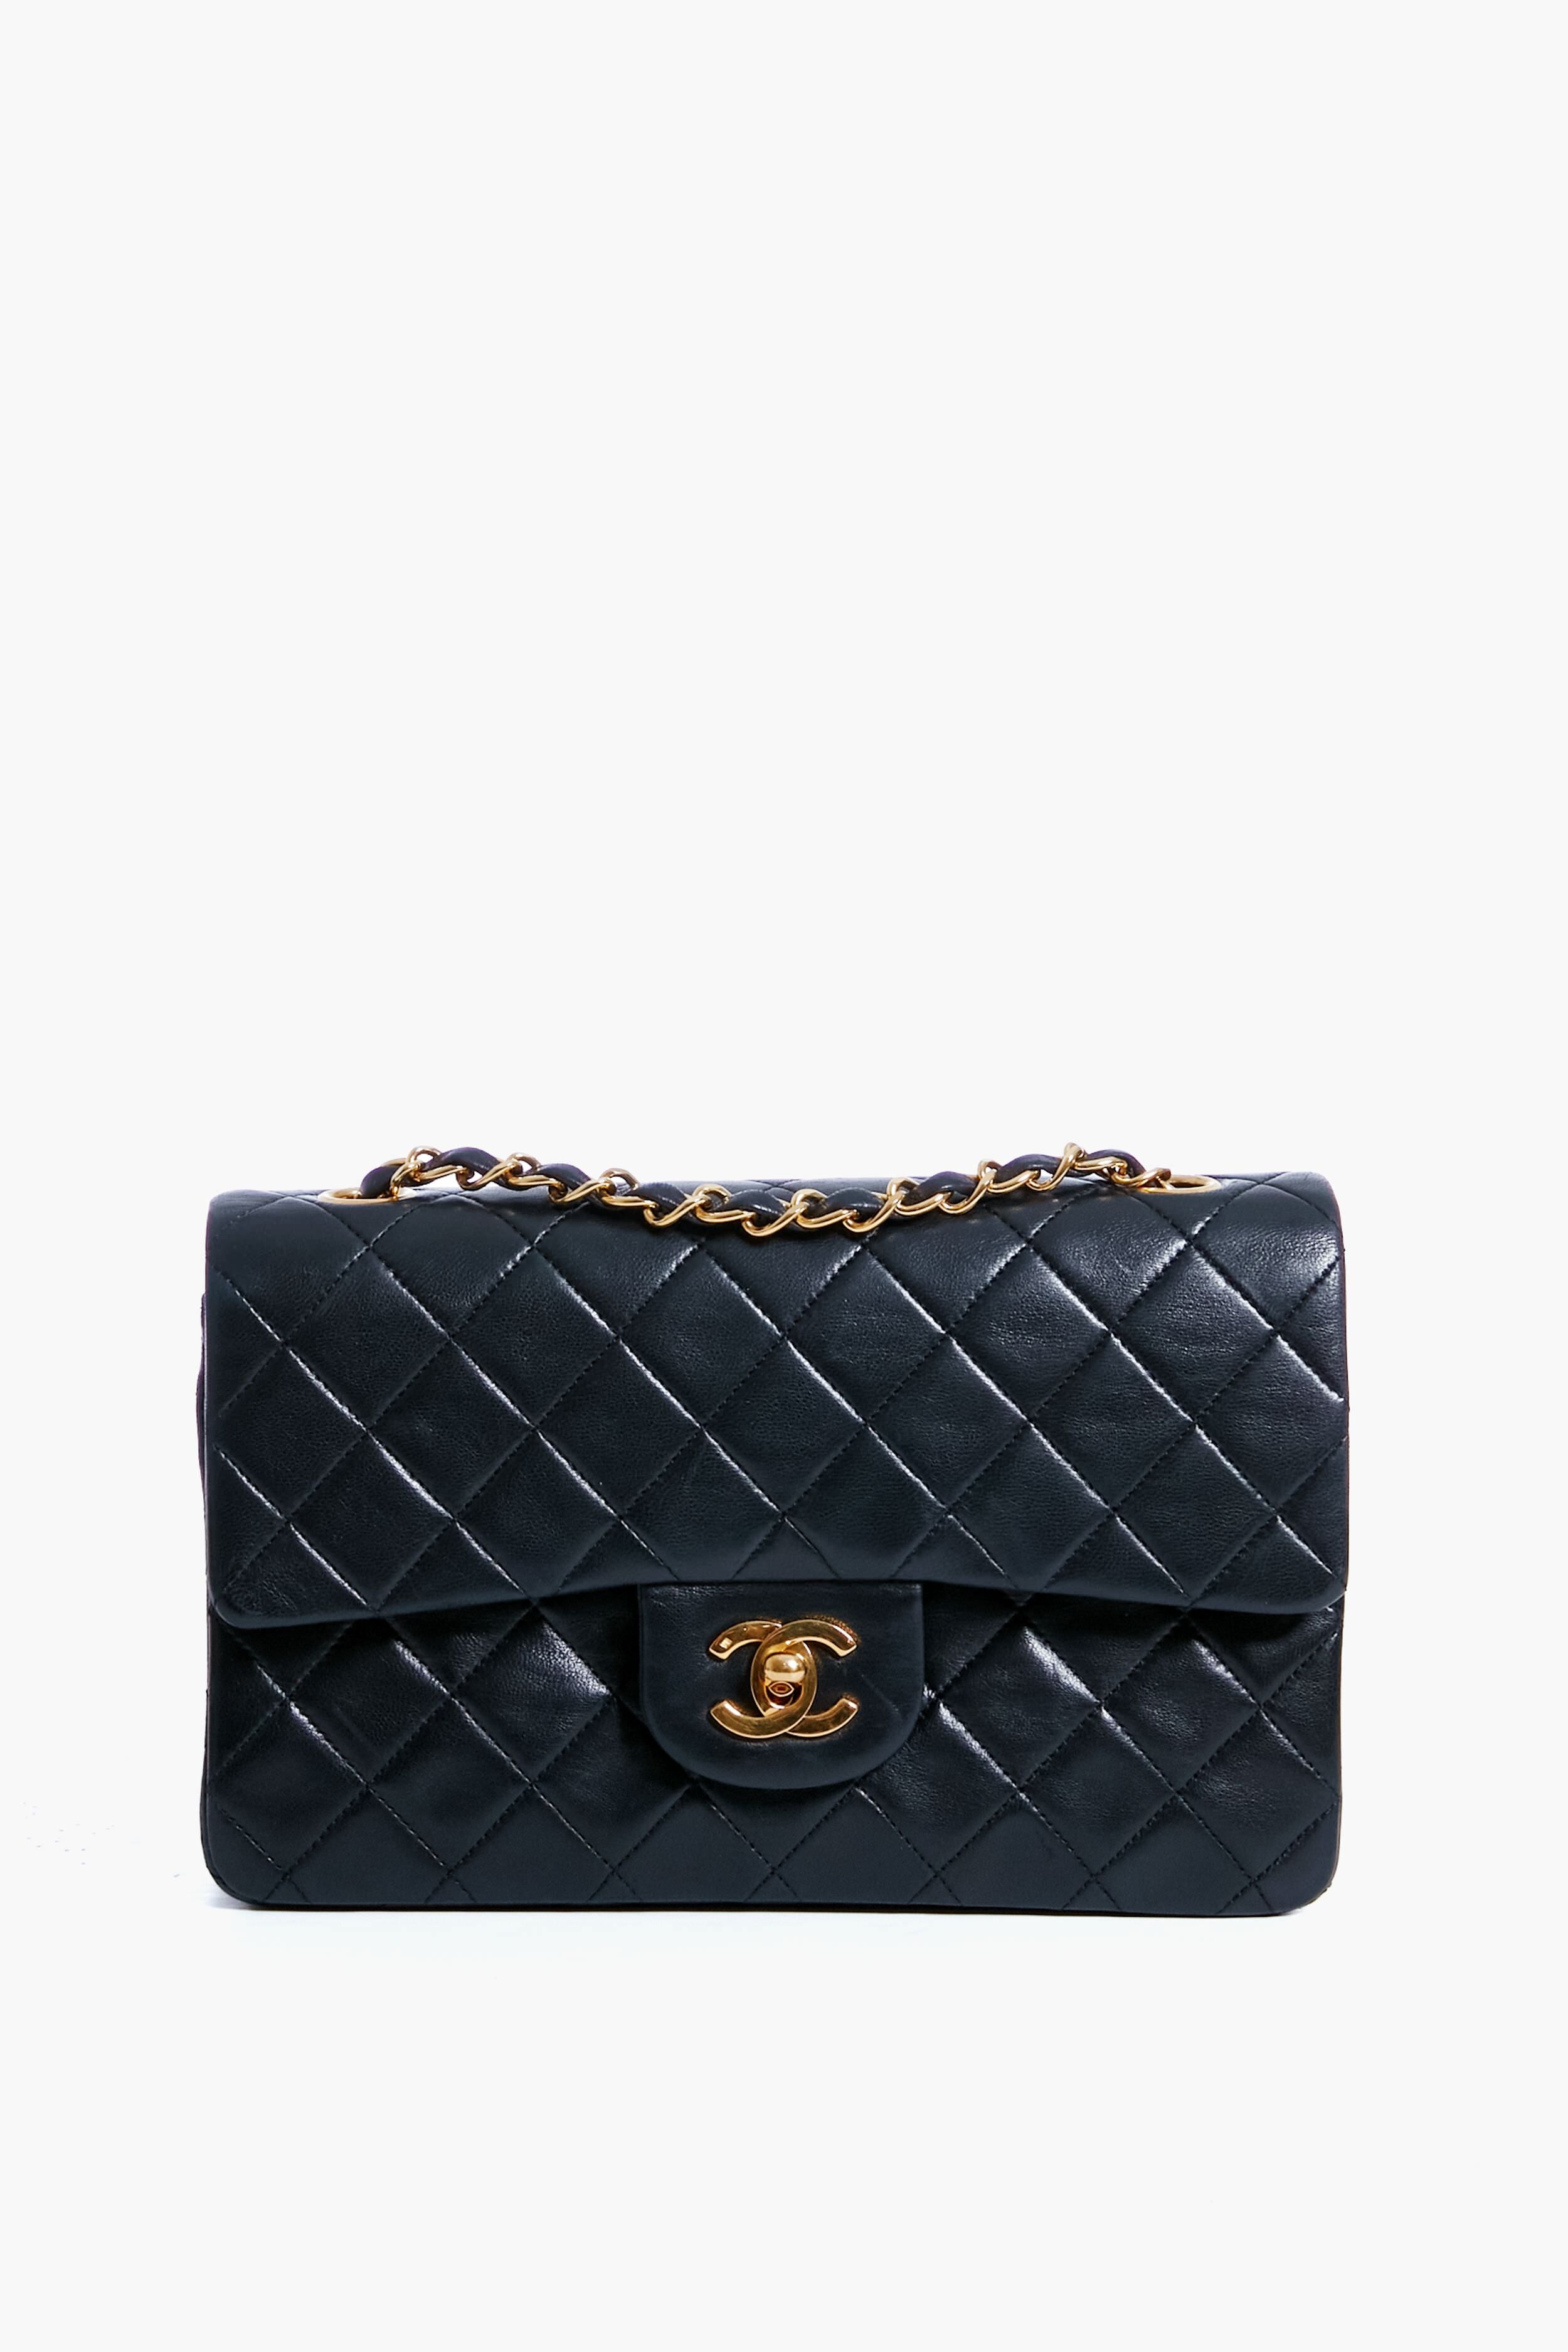 Women's Chanel Bags from A$909